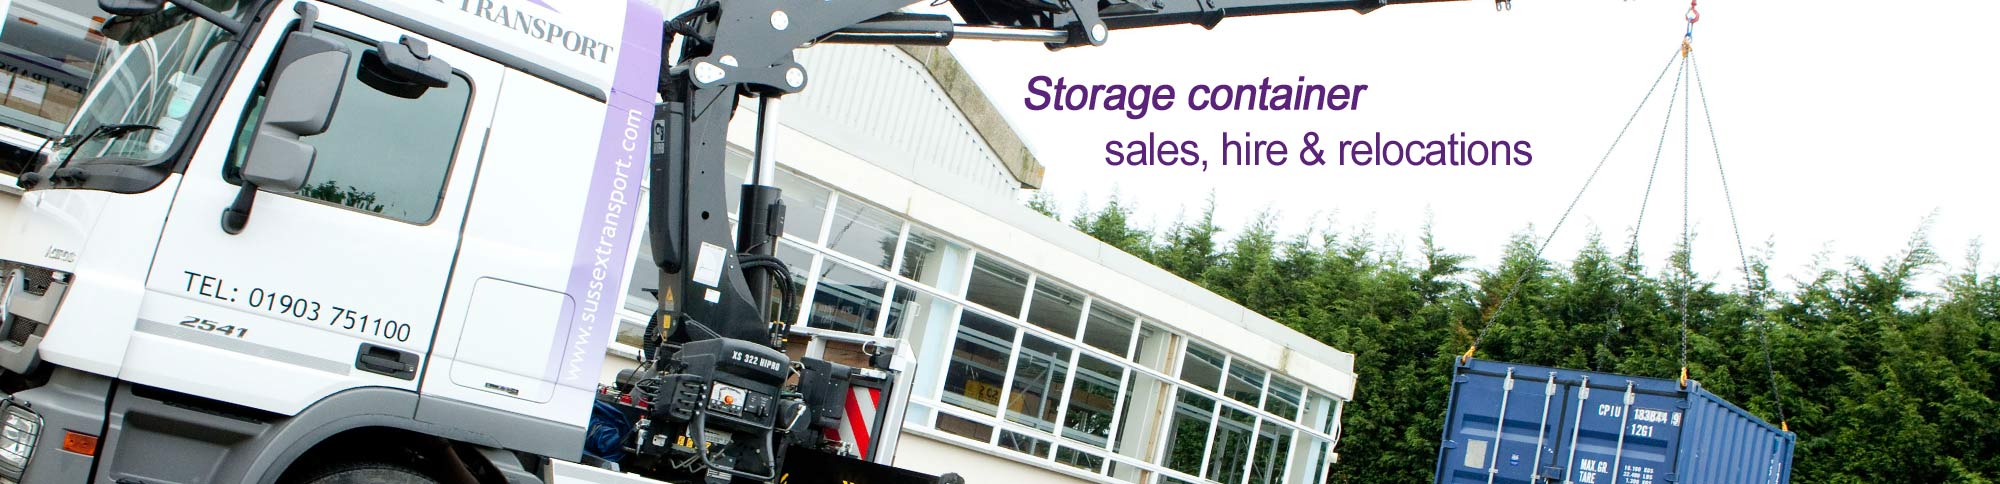 Storage Container Sales, Hire & Relocations